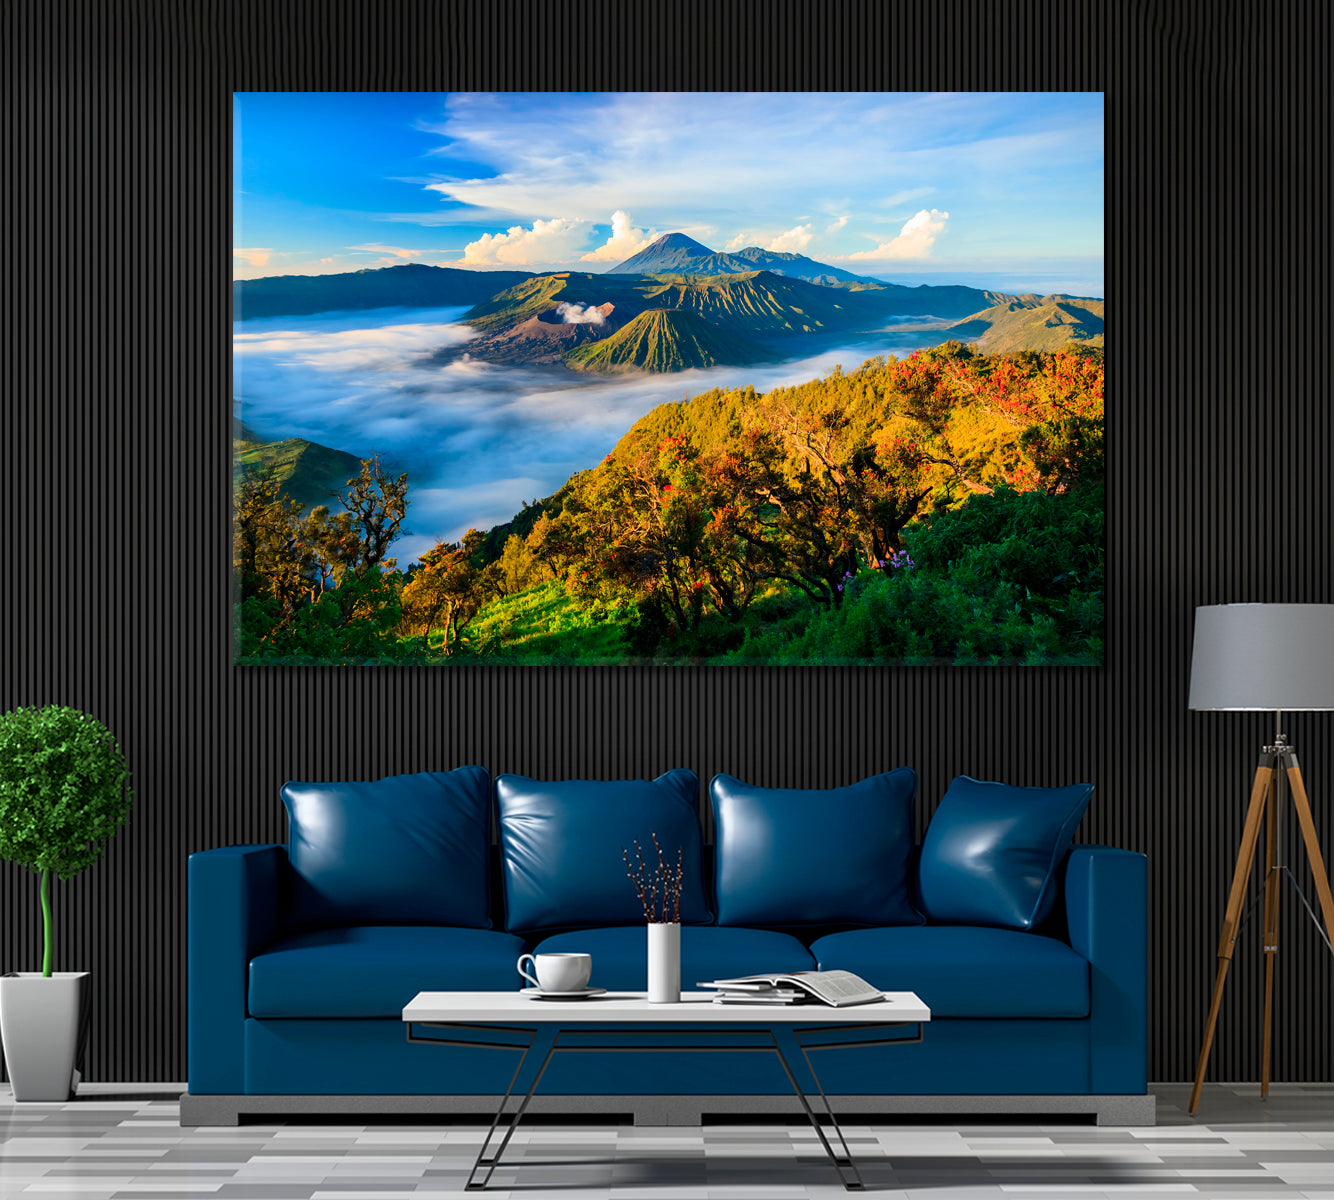 Mount Bromo Indonesia. Volcanic Landscape Canvas Print ArtLexy 1 Panel 24"x16" inches 